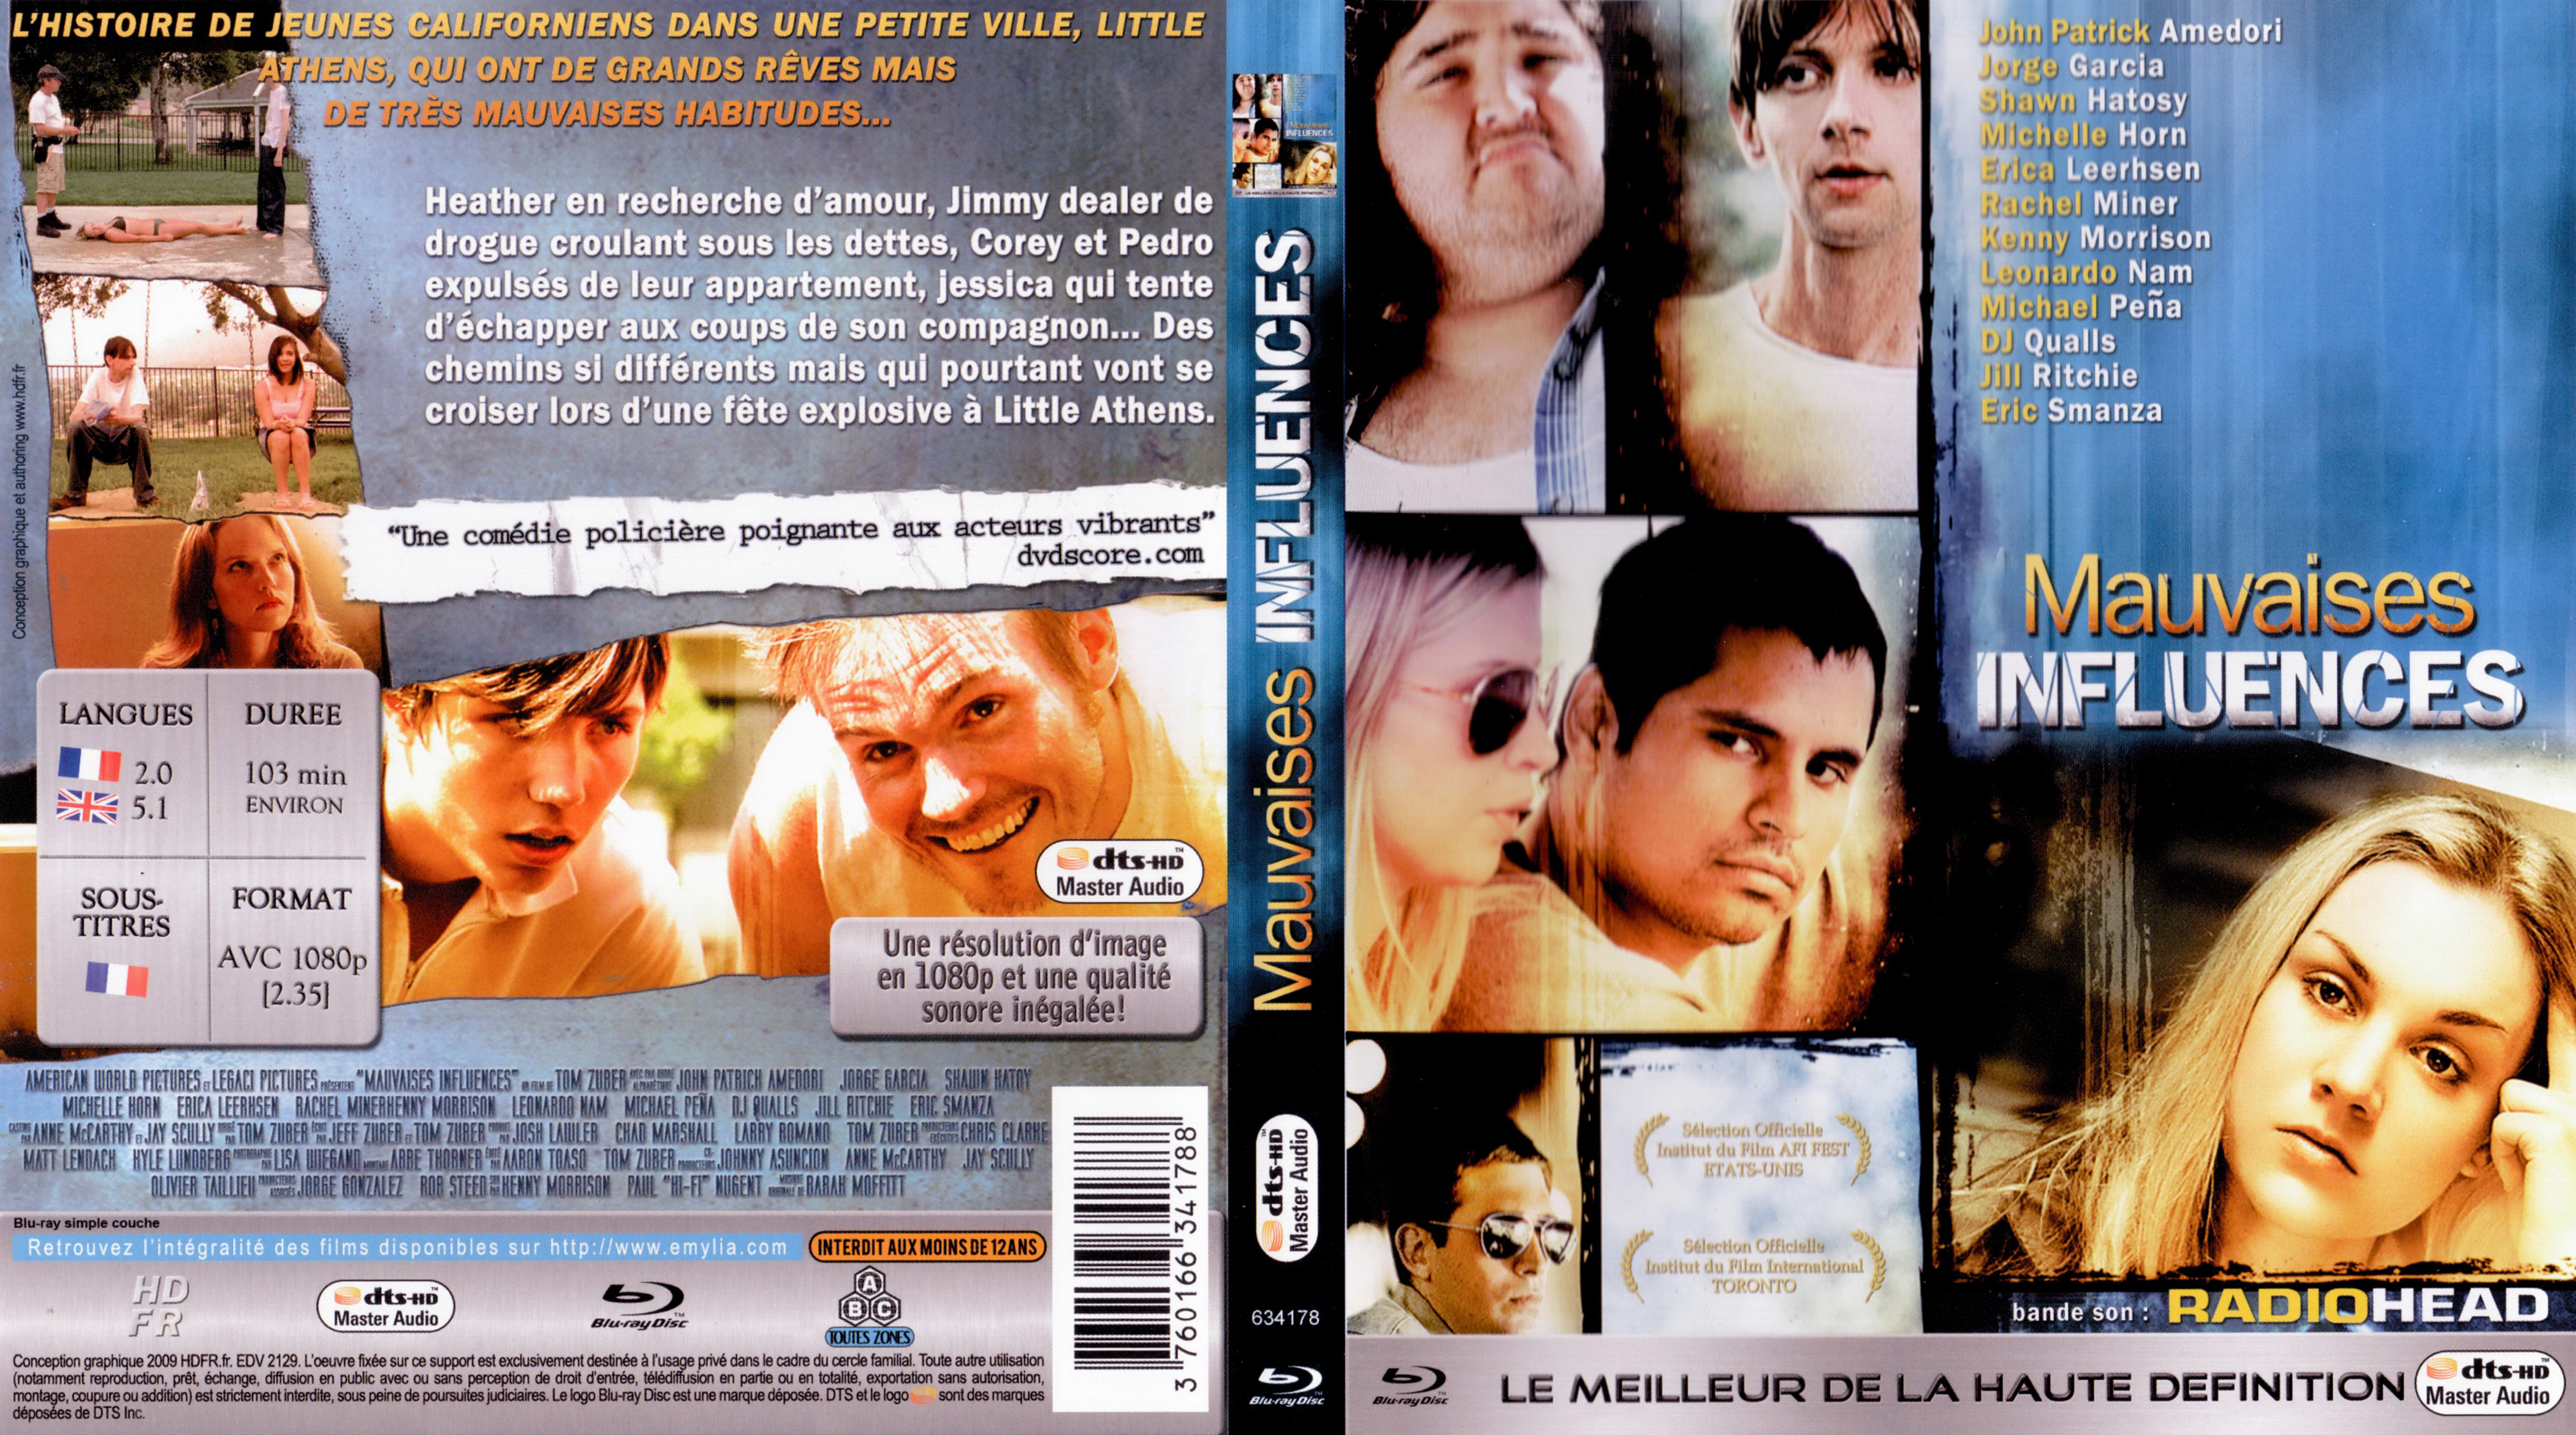 Jaquette DVD Mauvaises influences (BLU-RAY)